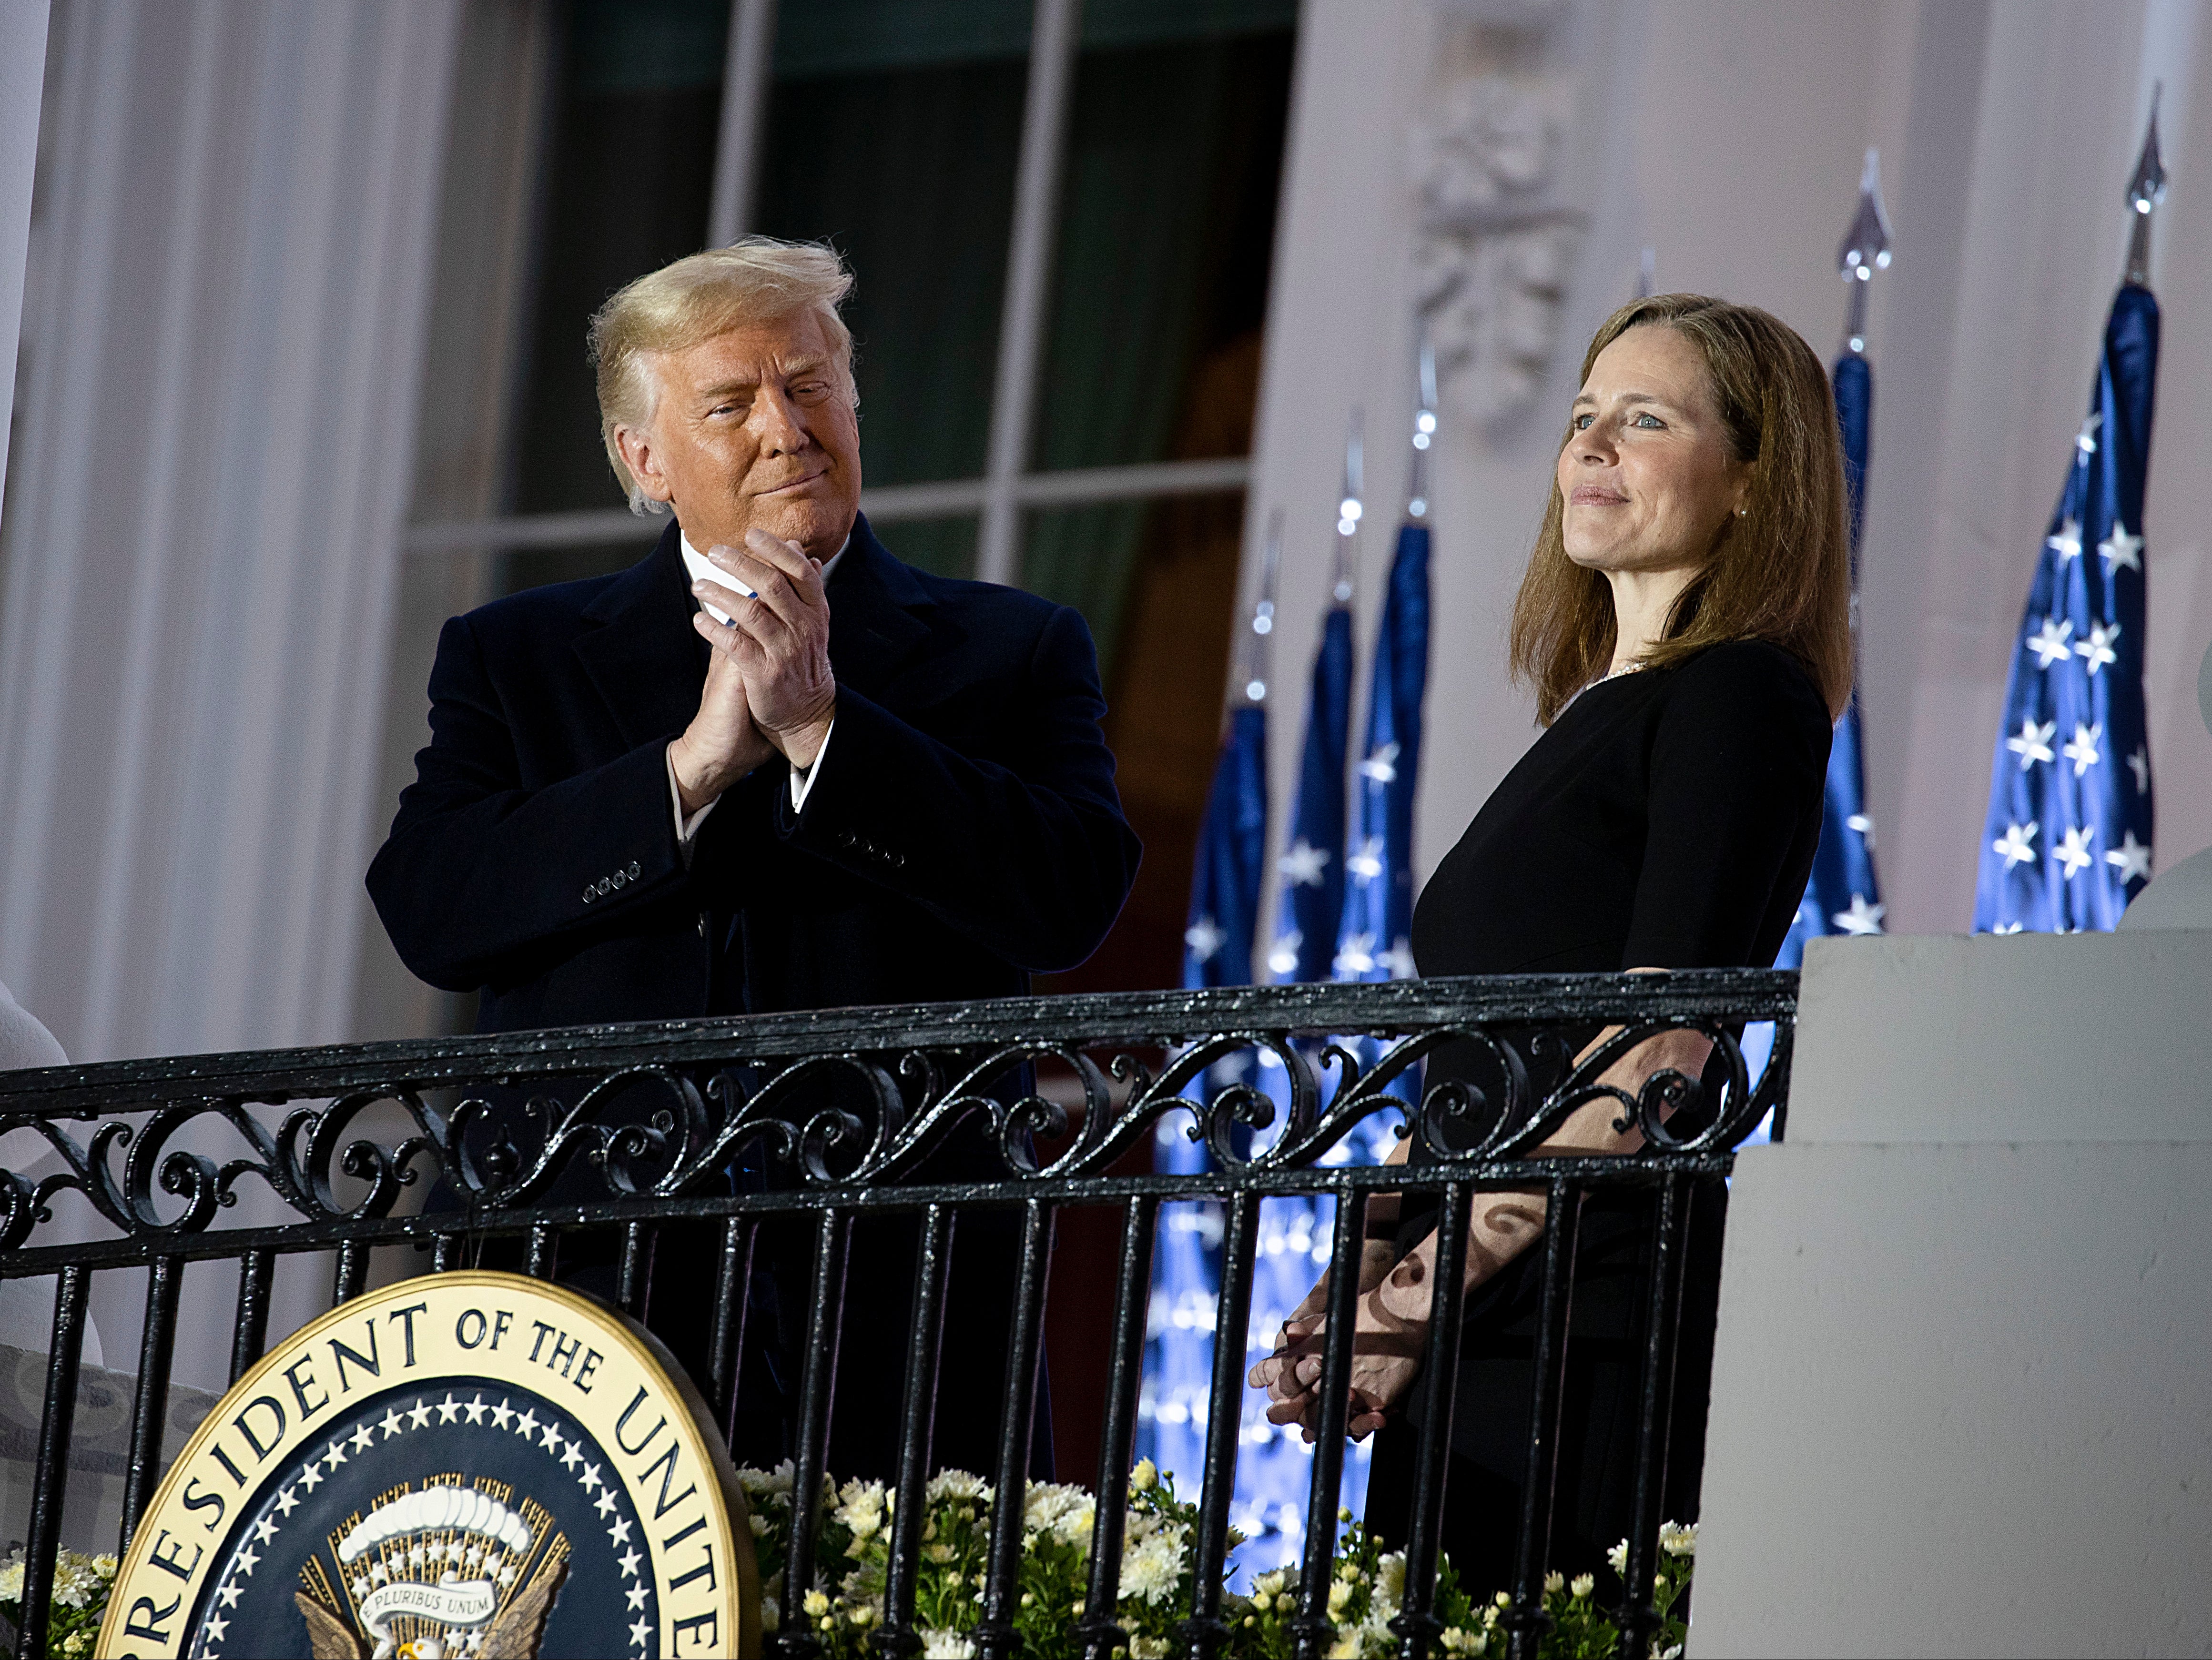 Donald Trump and the newly sworn-in Supreme Court Associate Justice Amy Coney Barrett